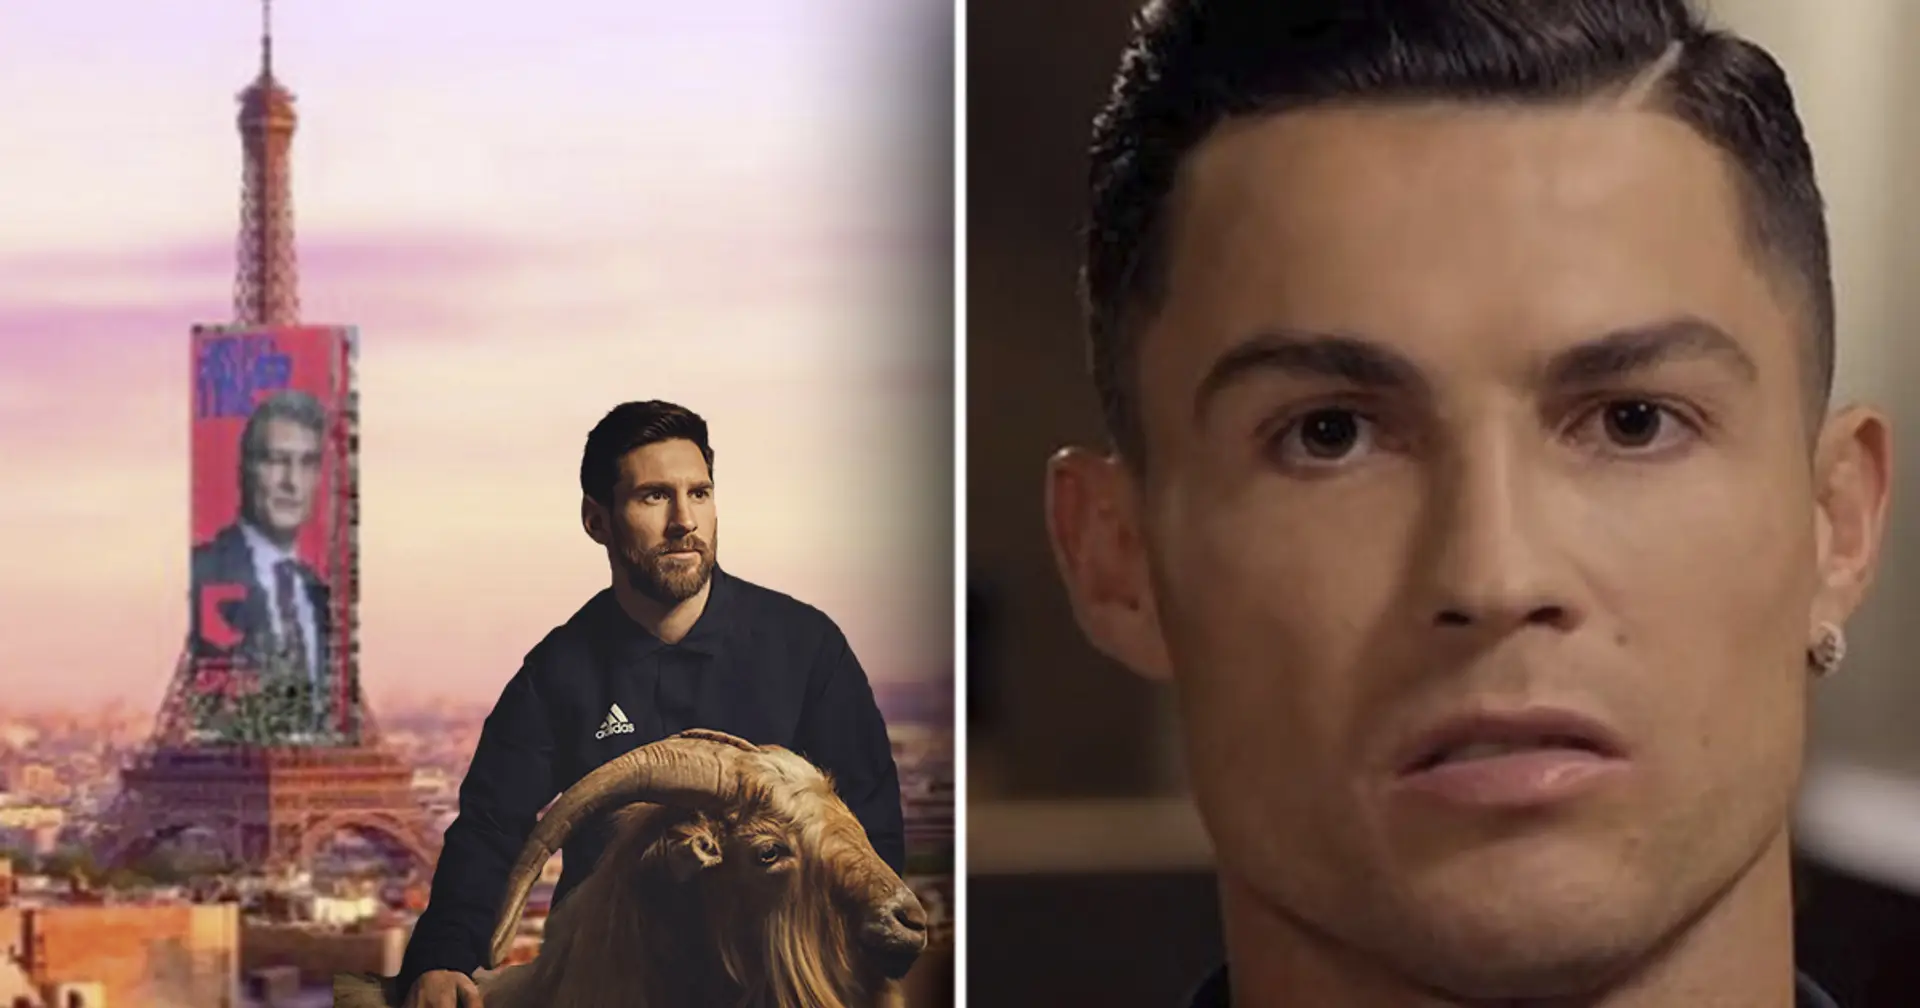 Ronaldo admits Messi is GOAT but says he looks better than him – and 3 more fake stories of the day